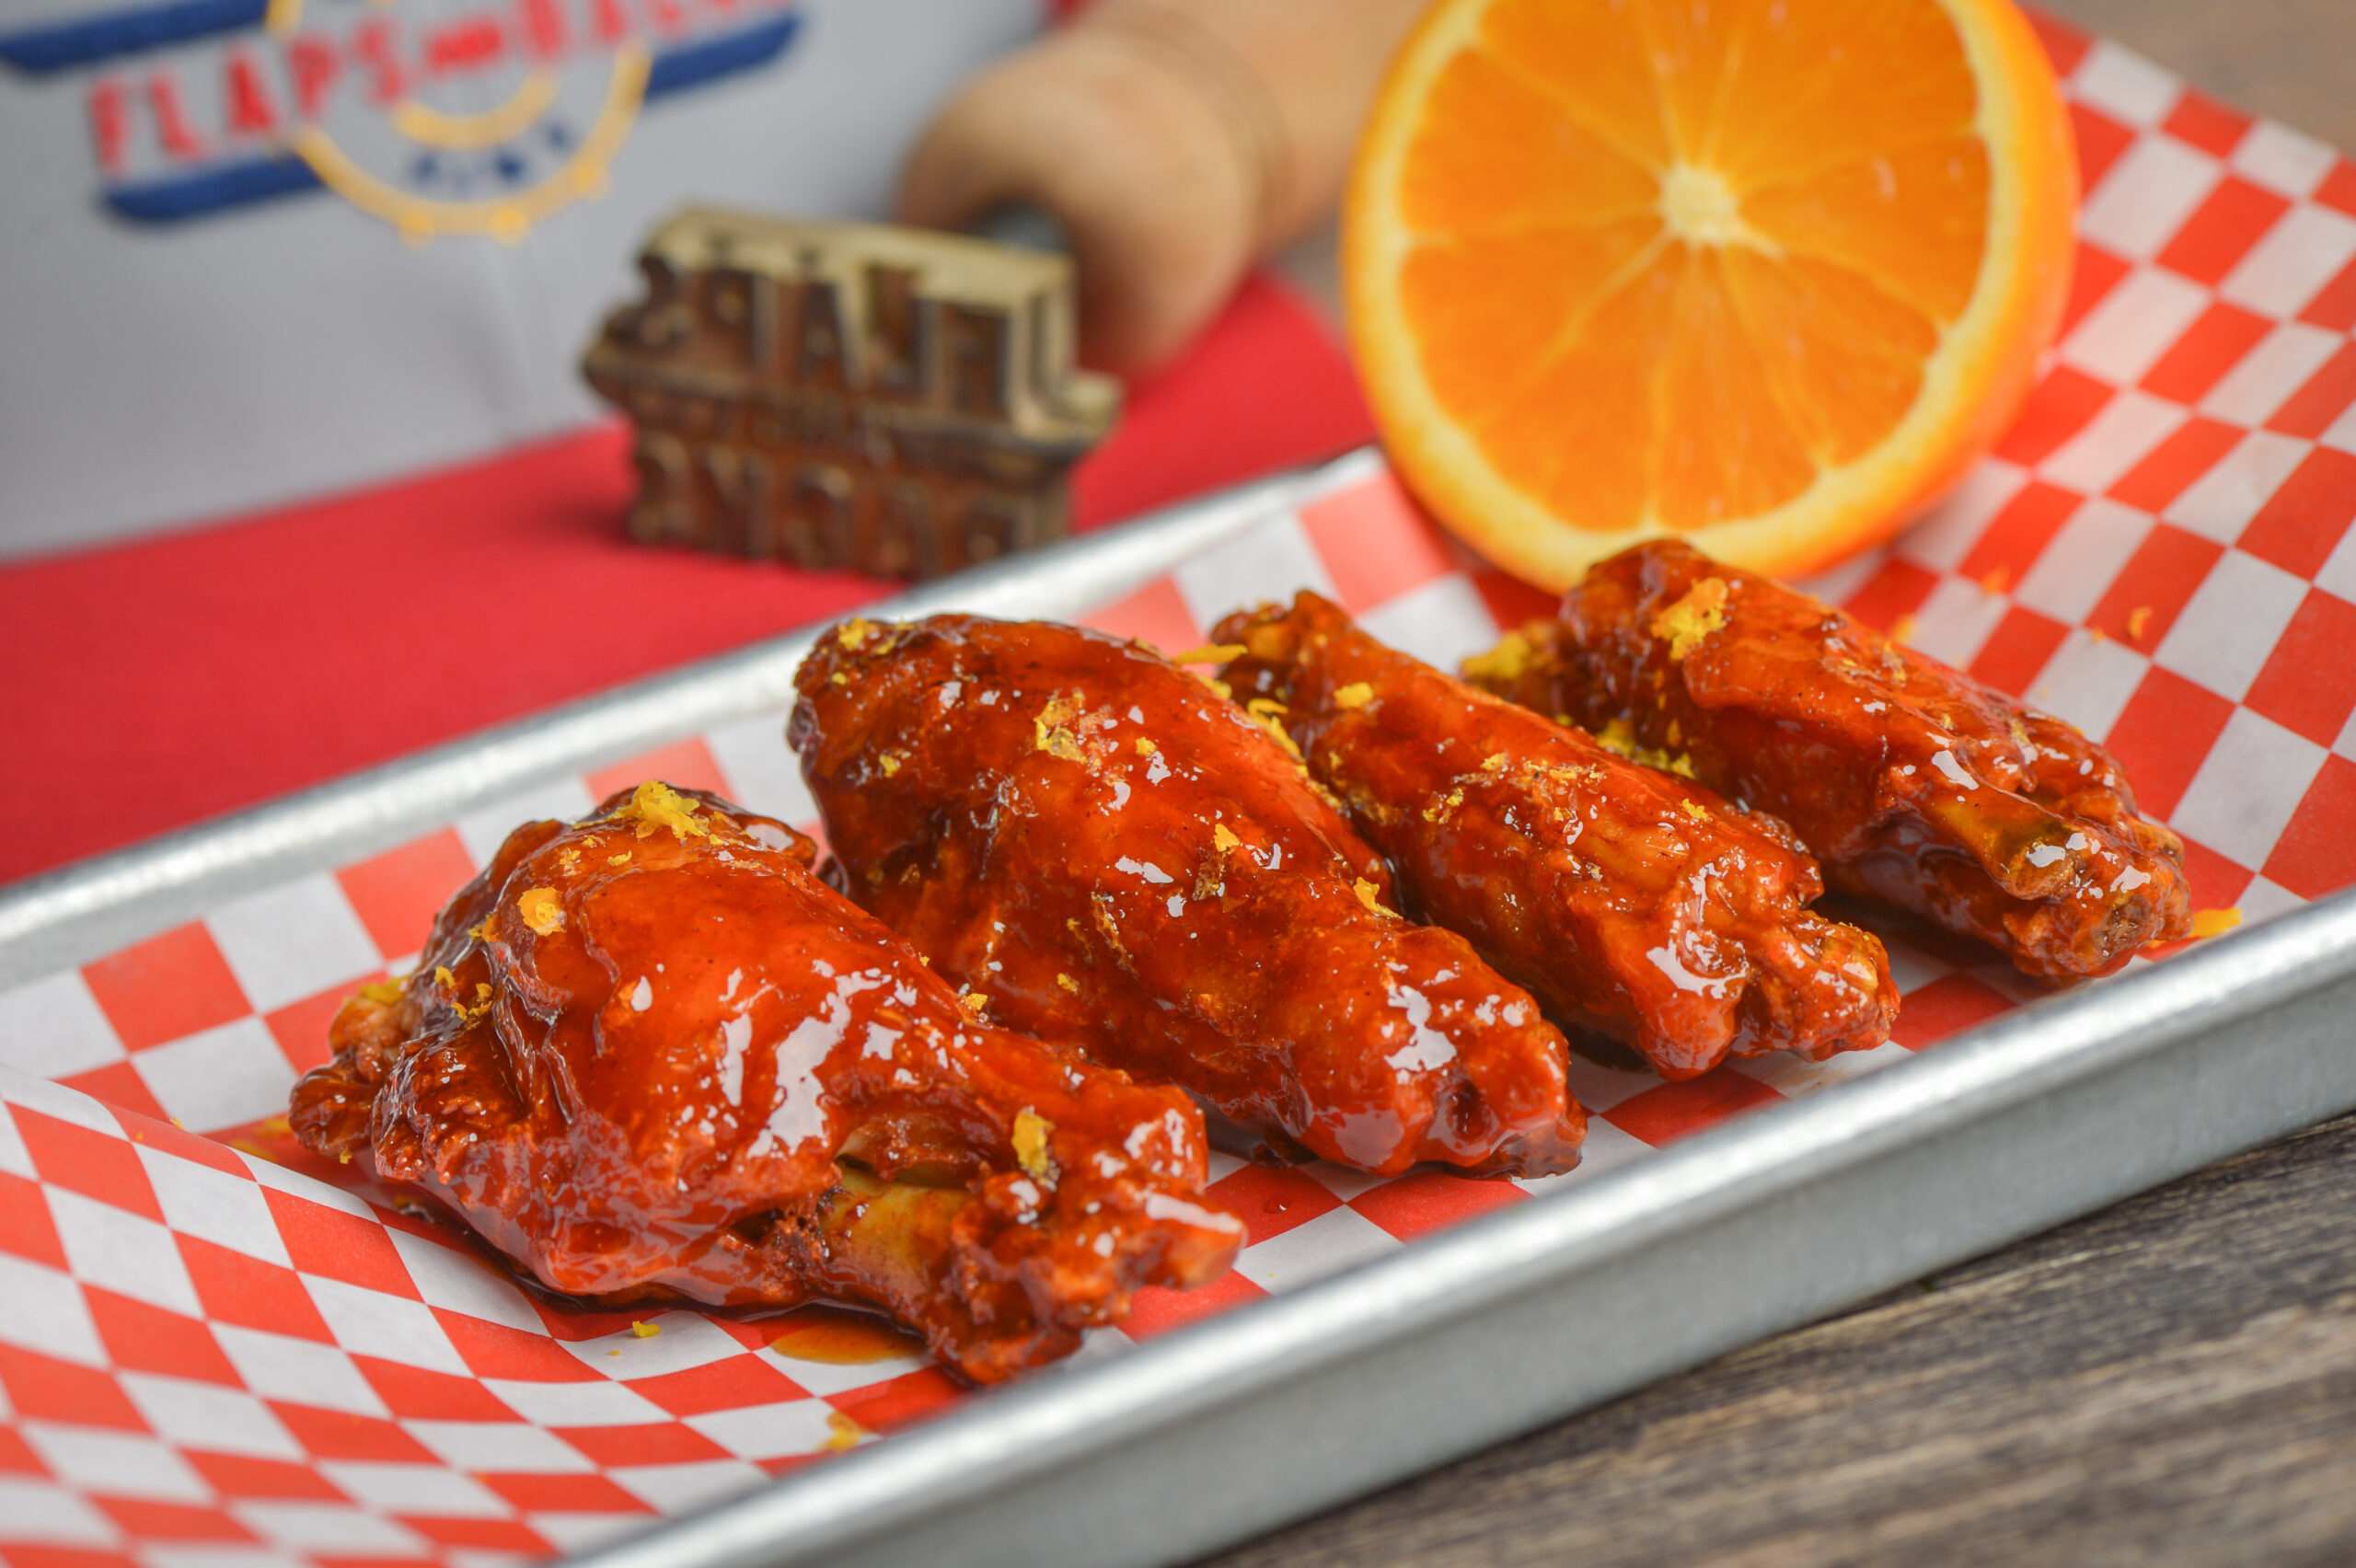 Flaps and Racks, Tucson, mouth watering chicken wings